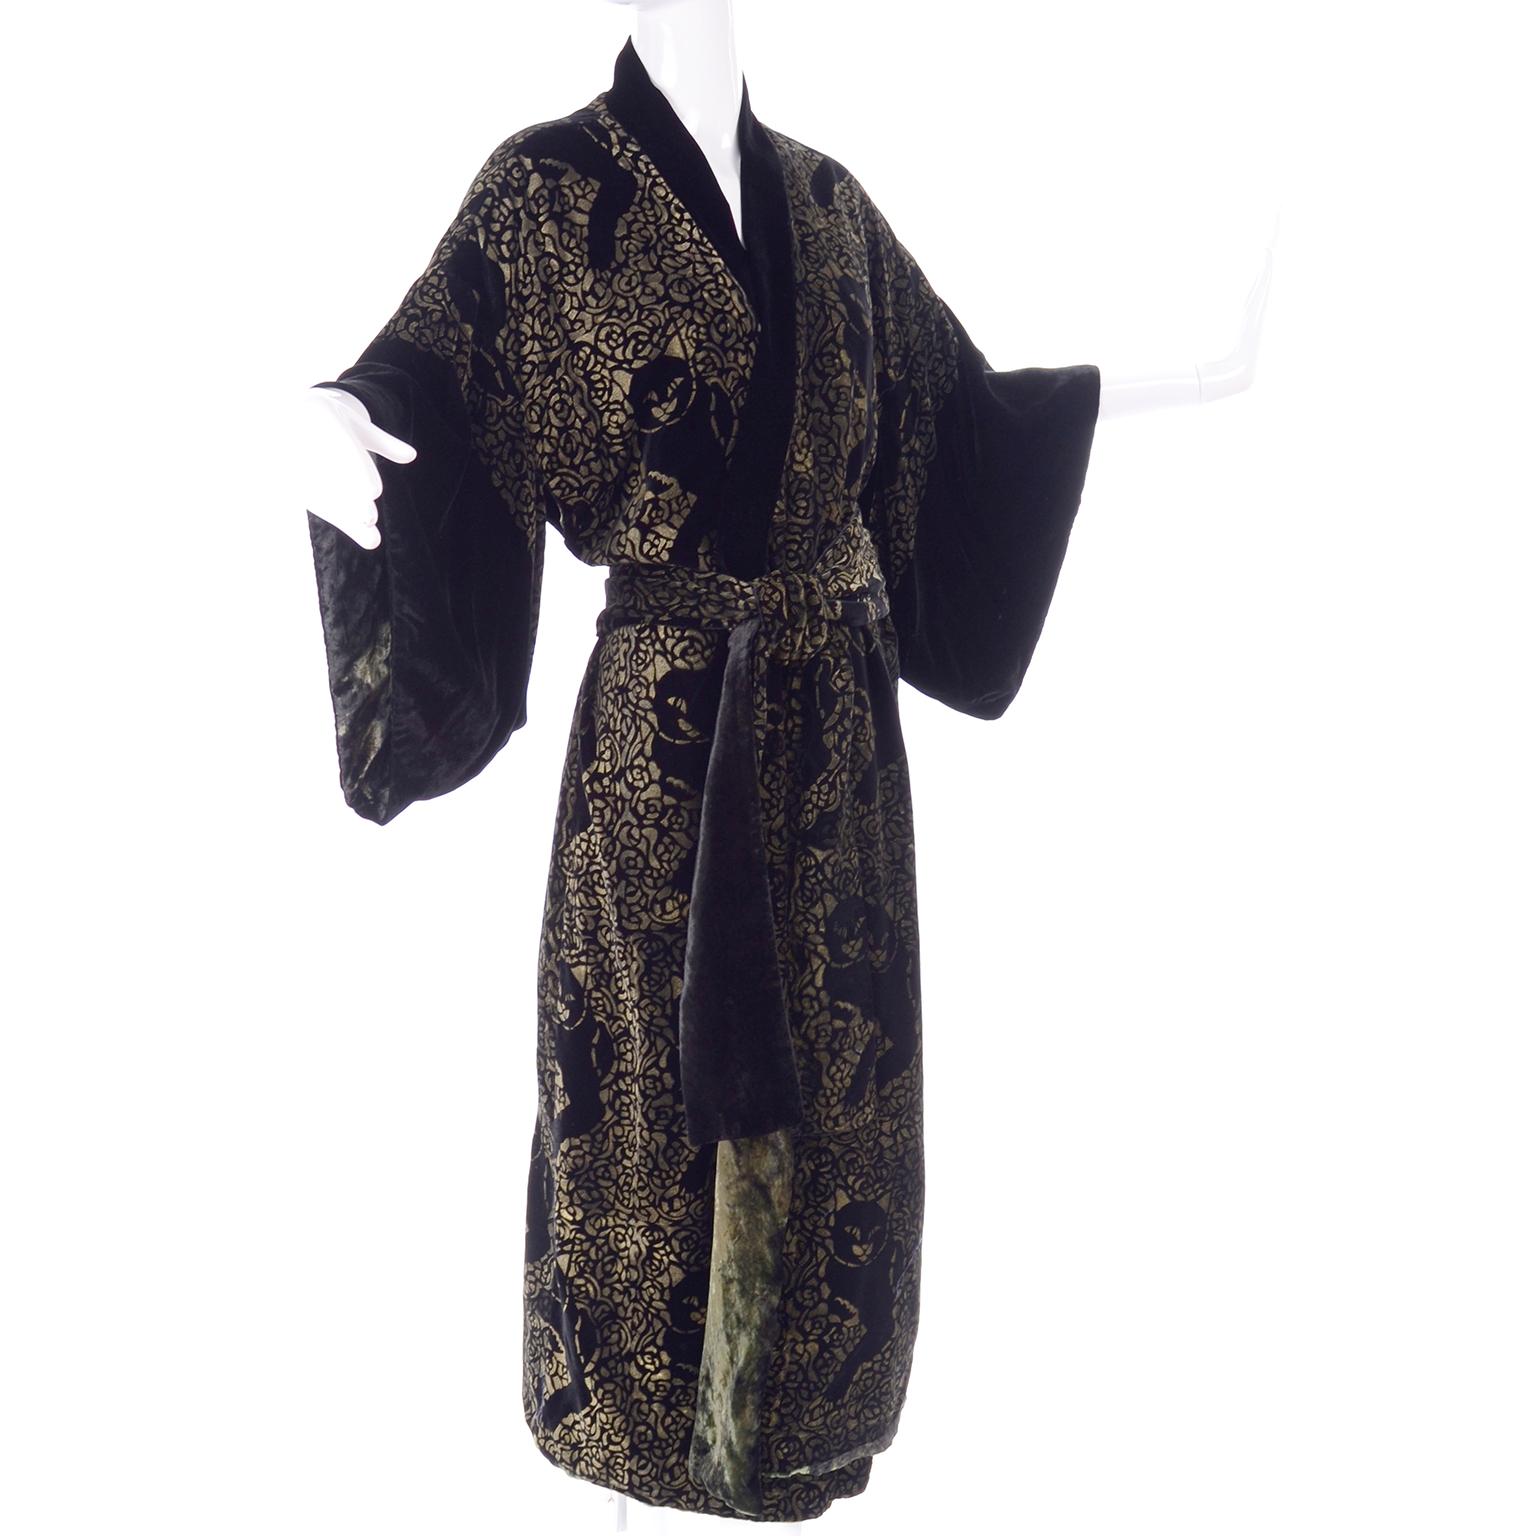 This is a gorgeous Fiorella Mancini stencilled black and gold velvet Stencilled evening coat covered in black cats!  This incredible coat is meant to be worn out and about, during the day or in the evening. There are lovely kimono sleeves and a